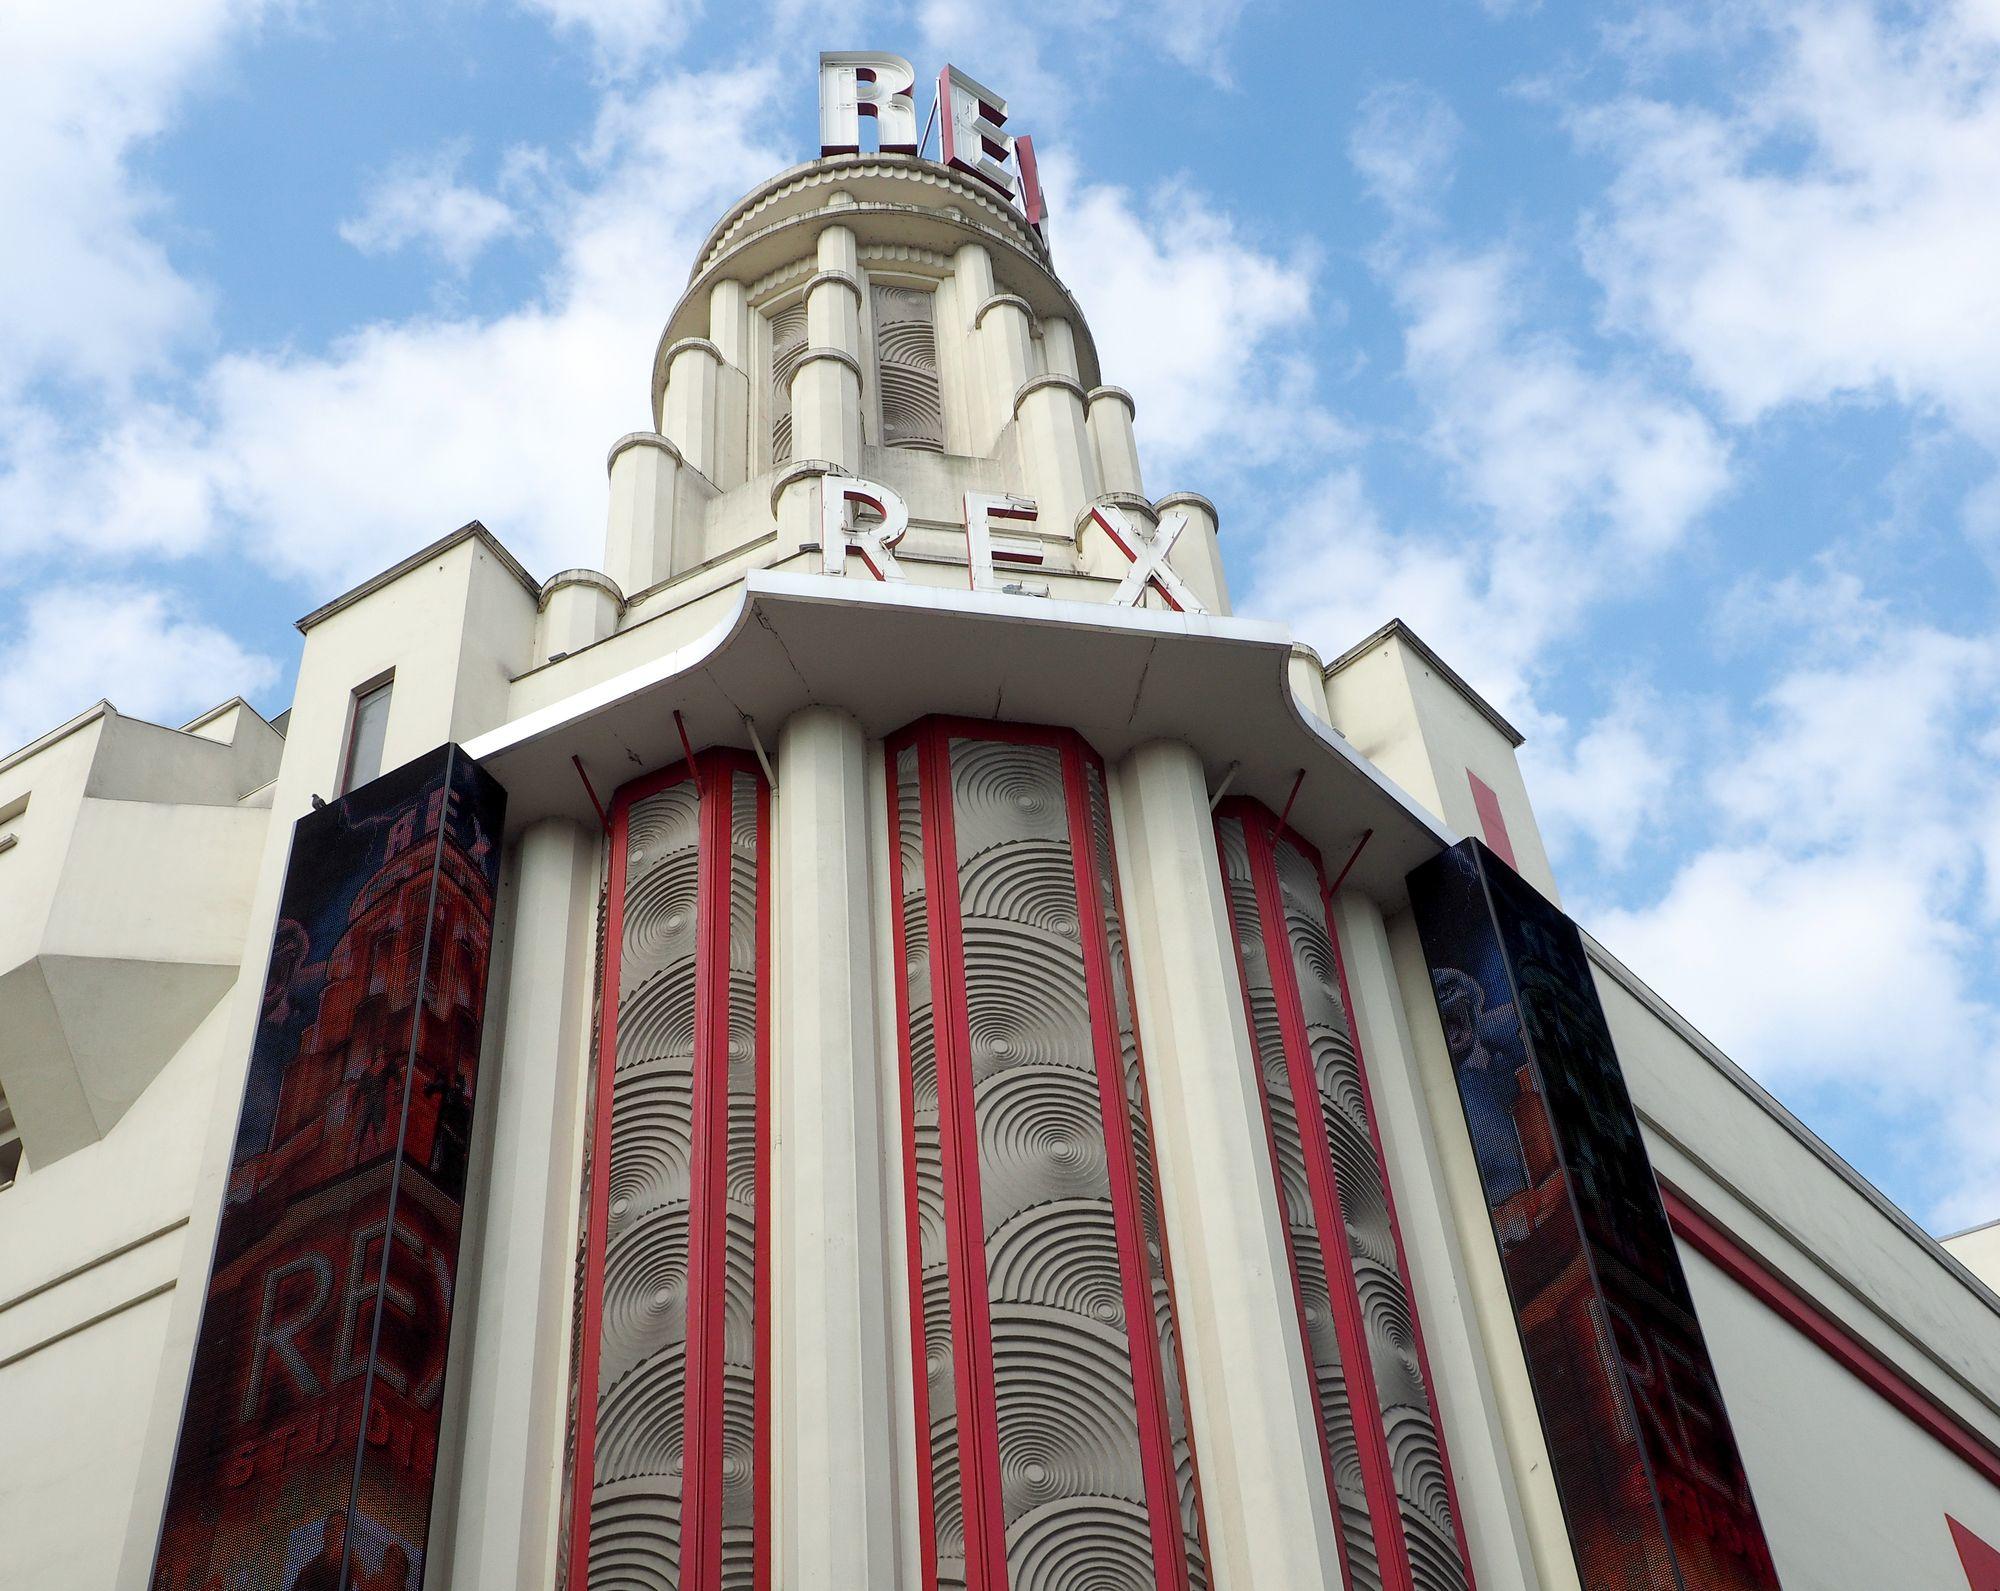 Along the Grands Boulevards, few steps from the Hotel Grammont, stands the impressive Grand Rex movie theater. Looking at a movie in this huge panoramic projection rooms is like attending a show